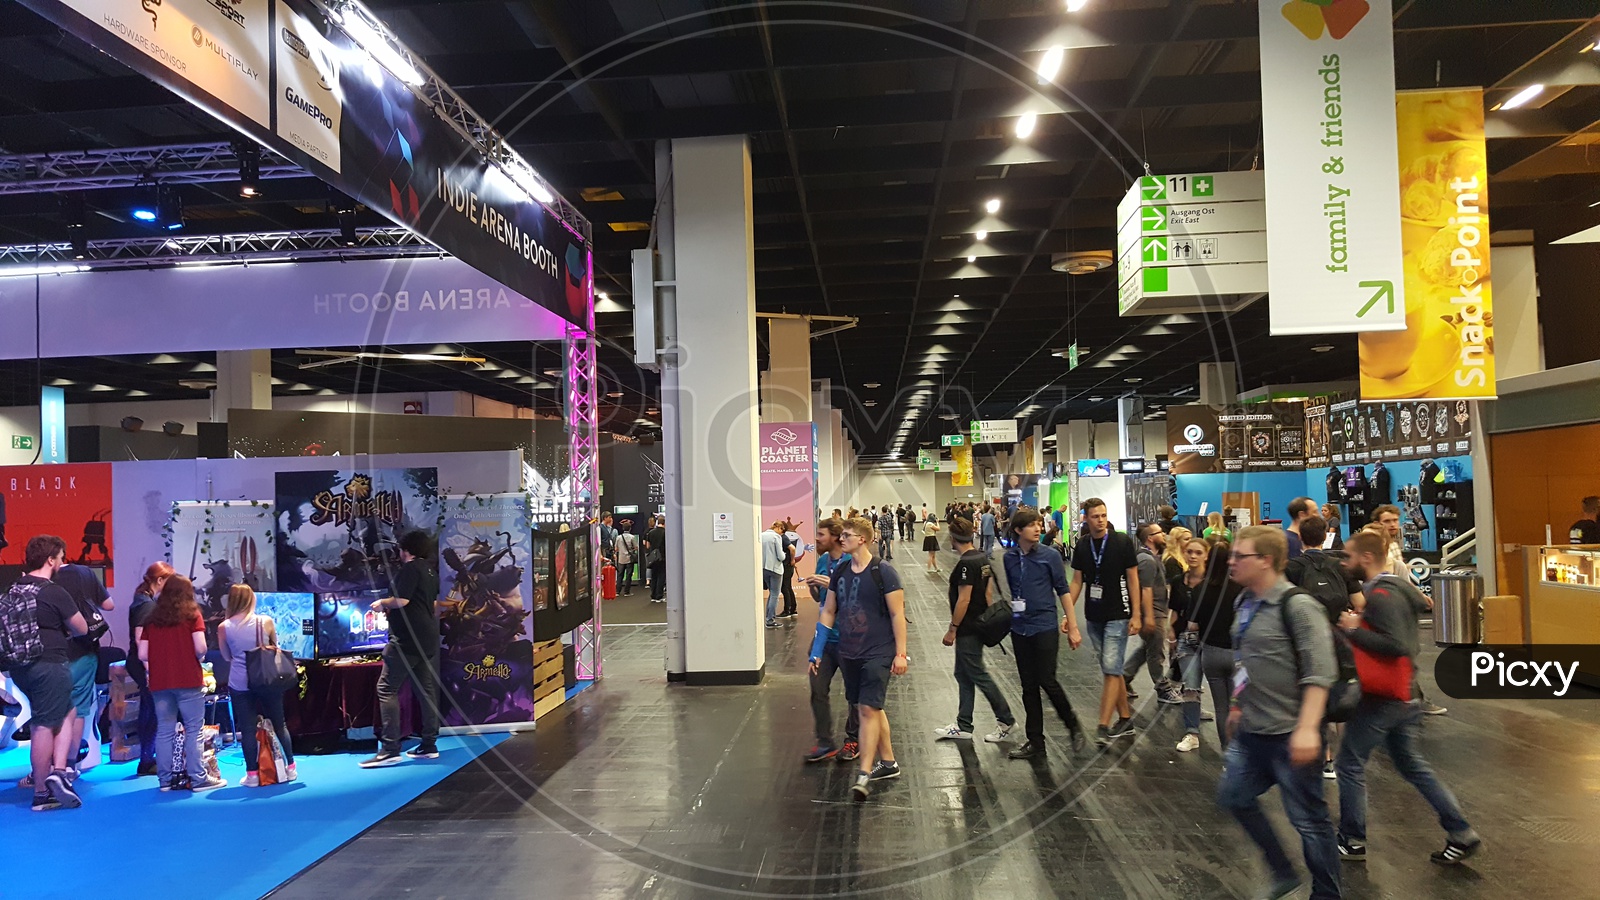 Gamescom, the world's largest trade fair for interactive consumer electronics, video games and computer games, Cologne